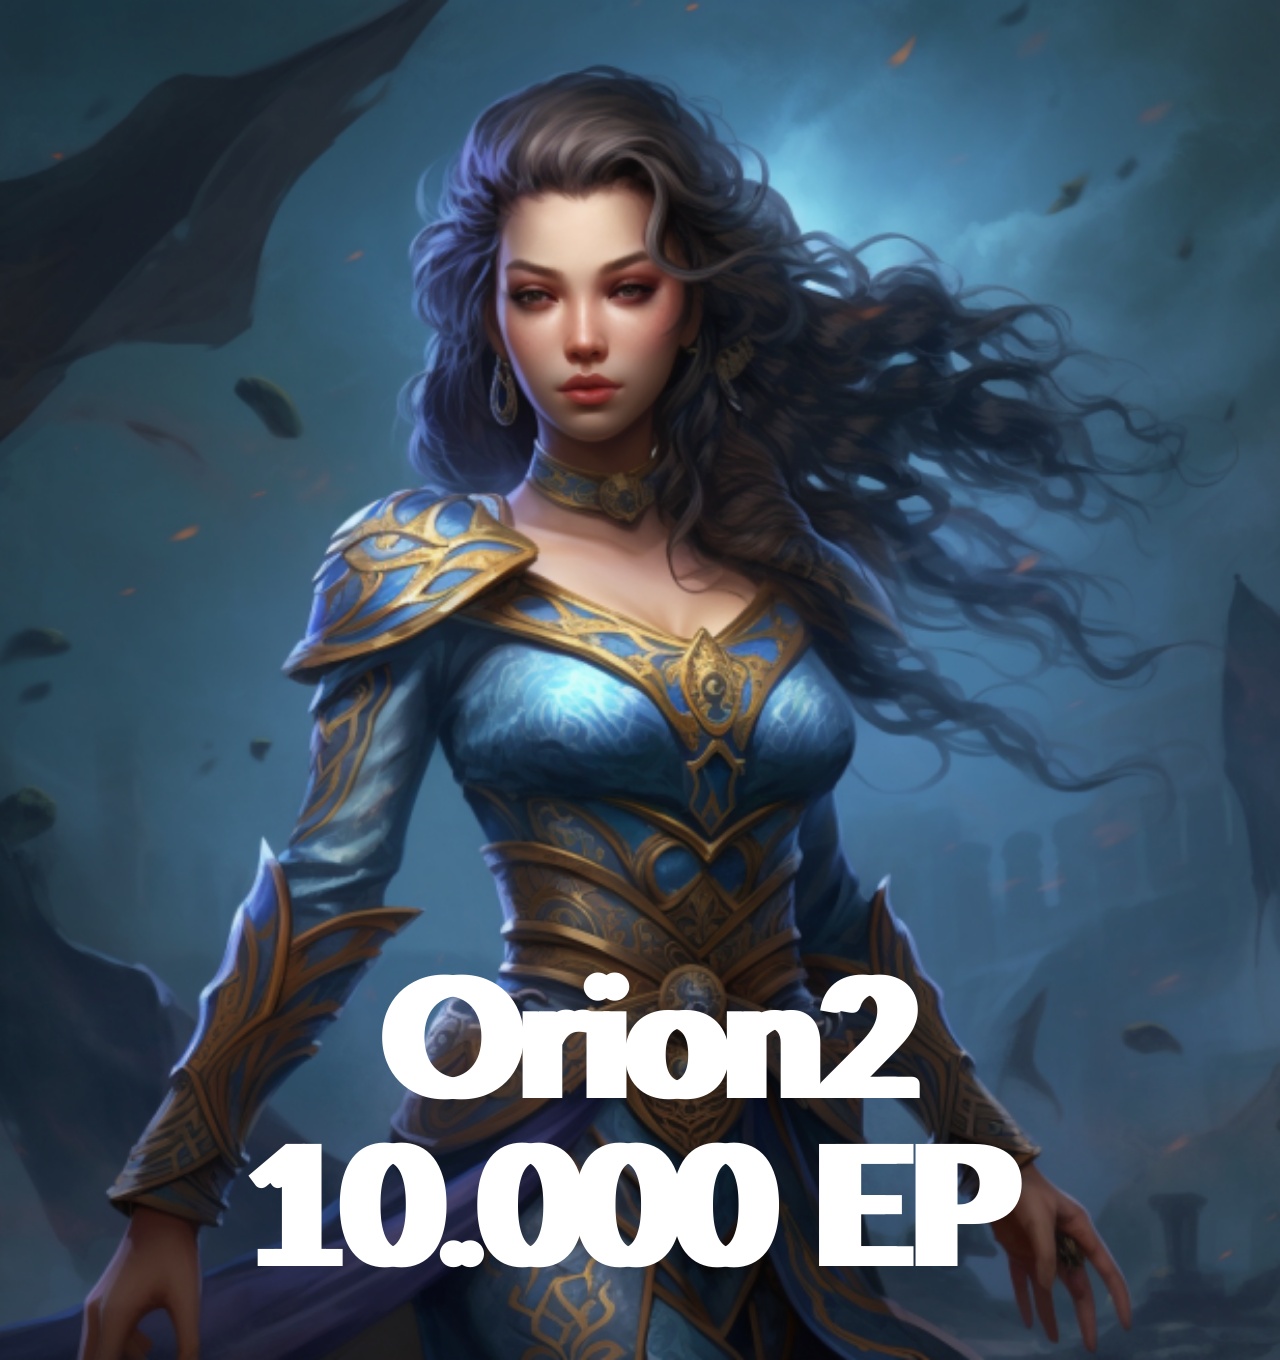 Orion2 10.000 EP